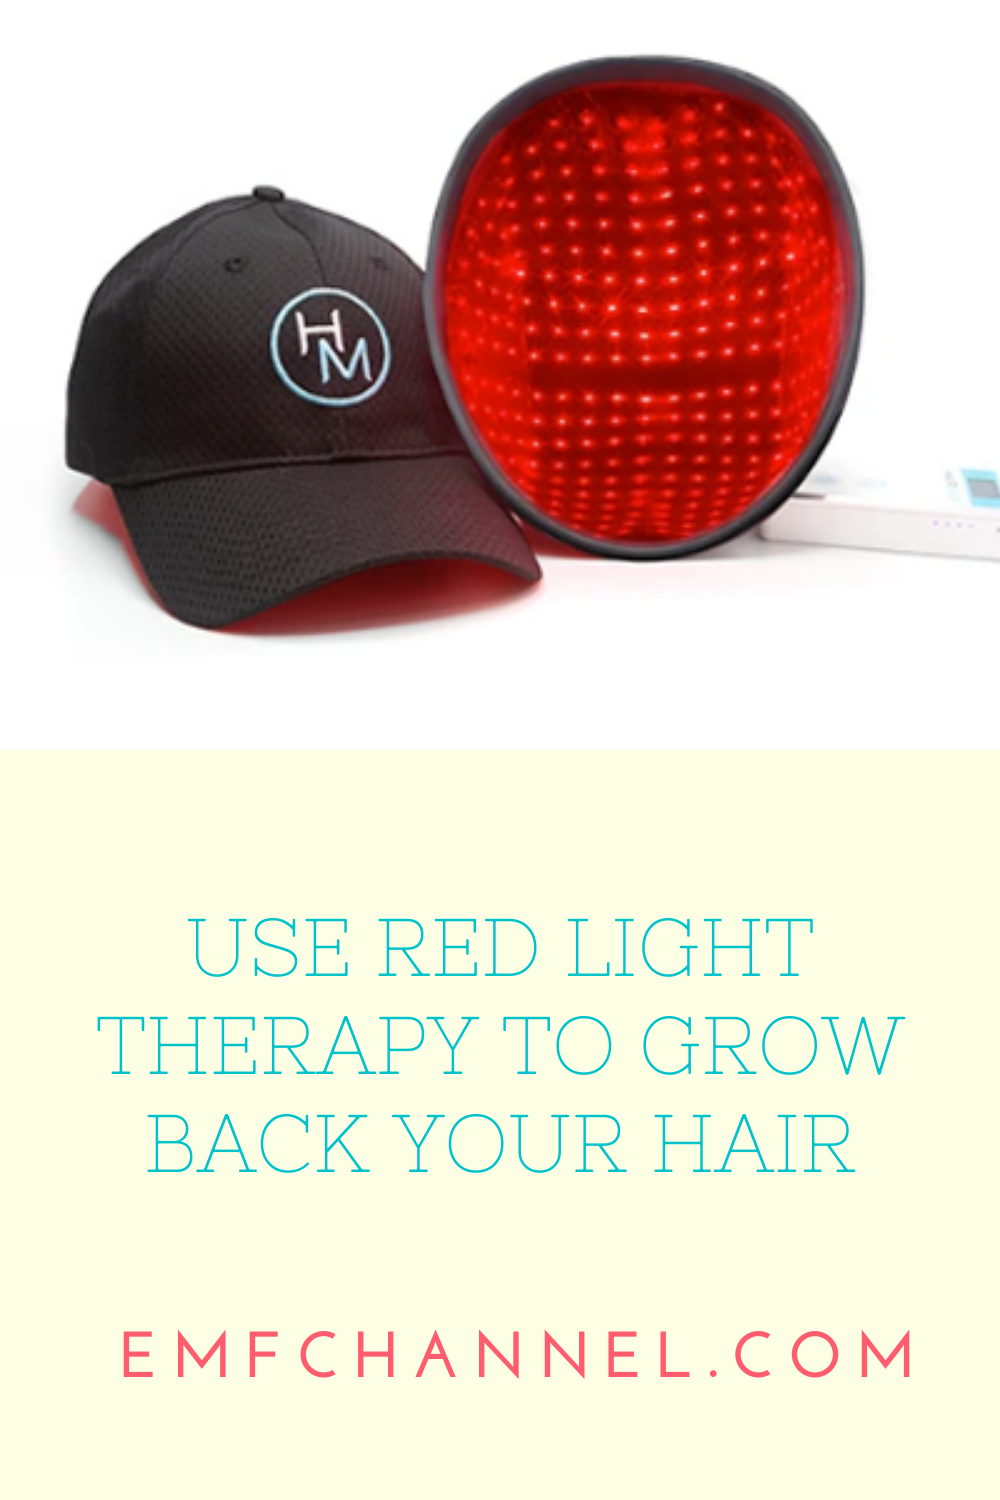 Use Red Light Therapy to Grow Back Your Hair